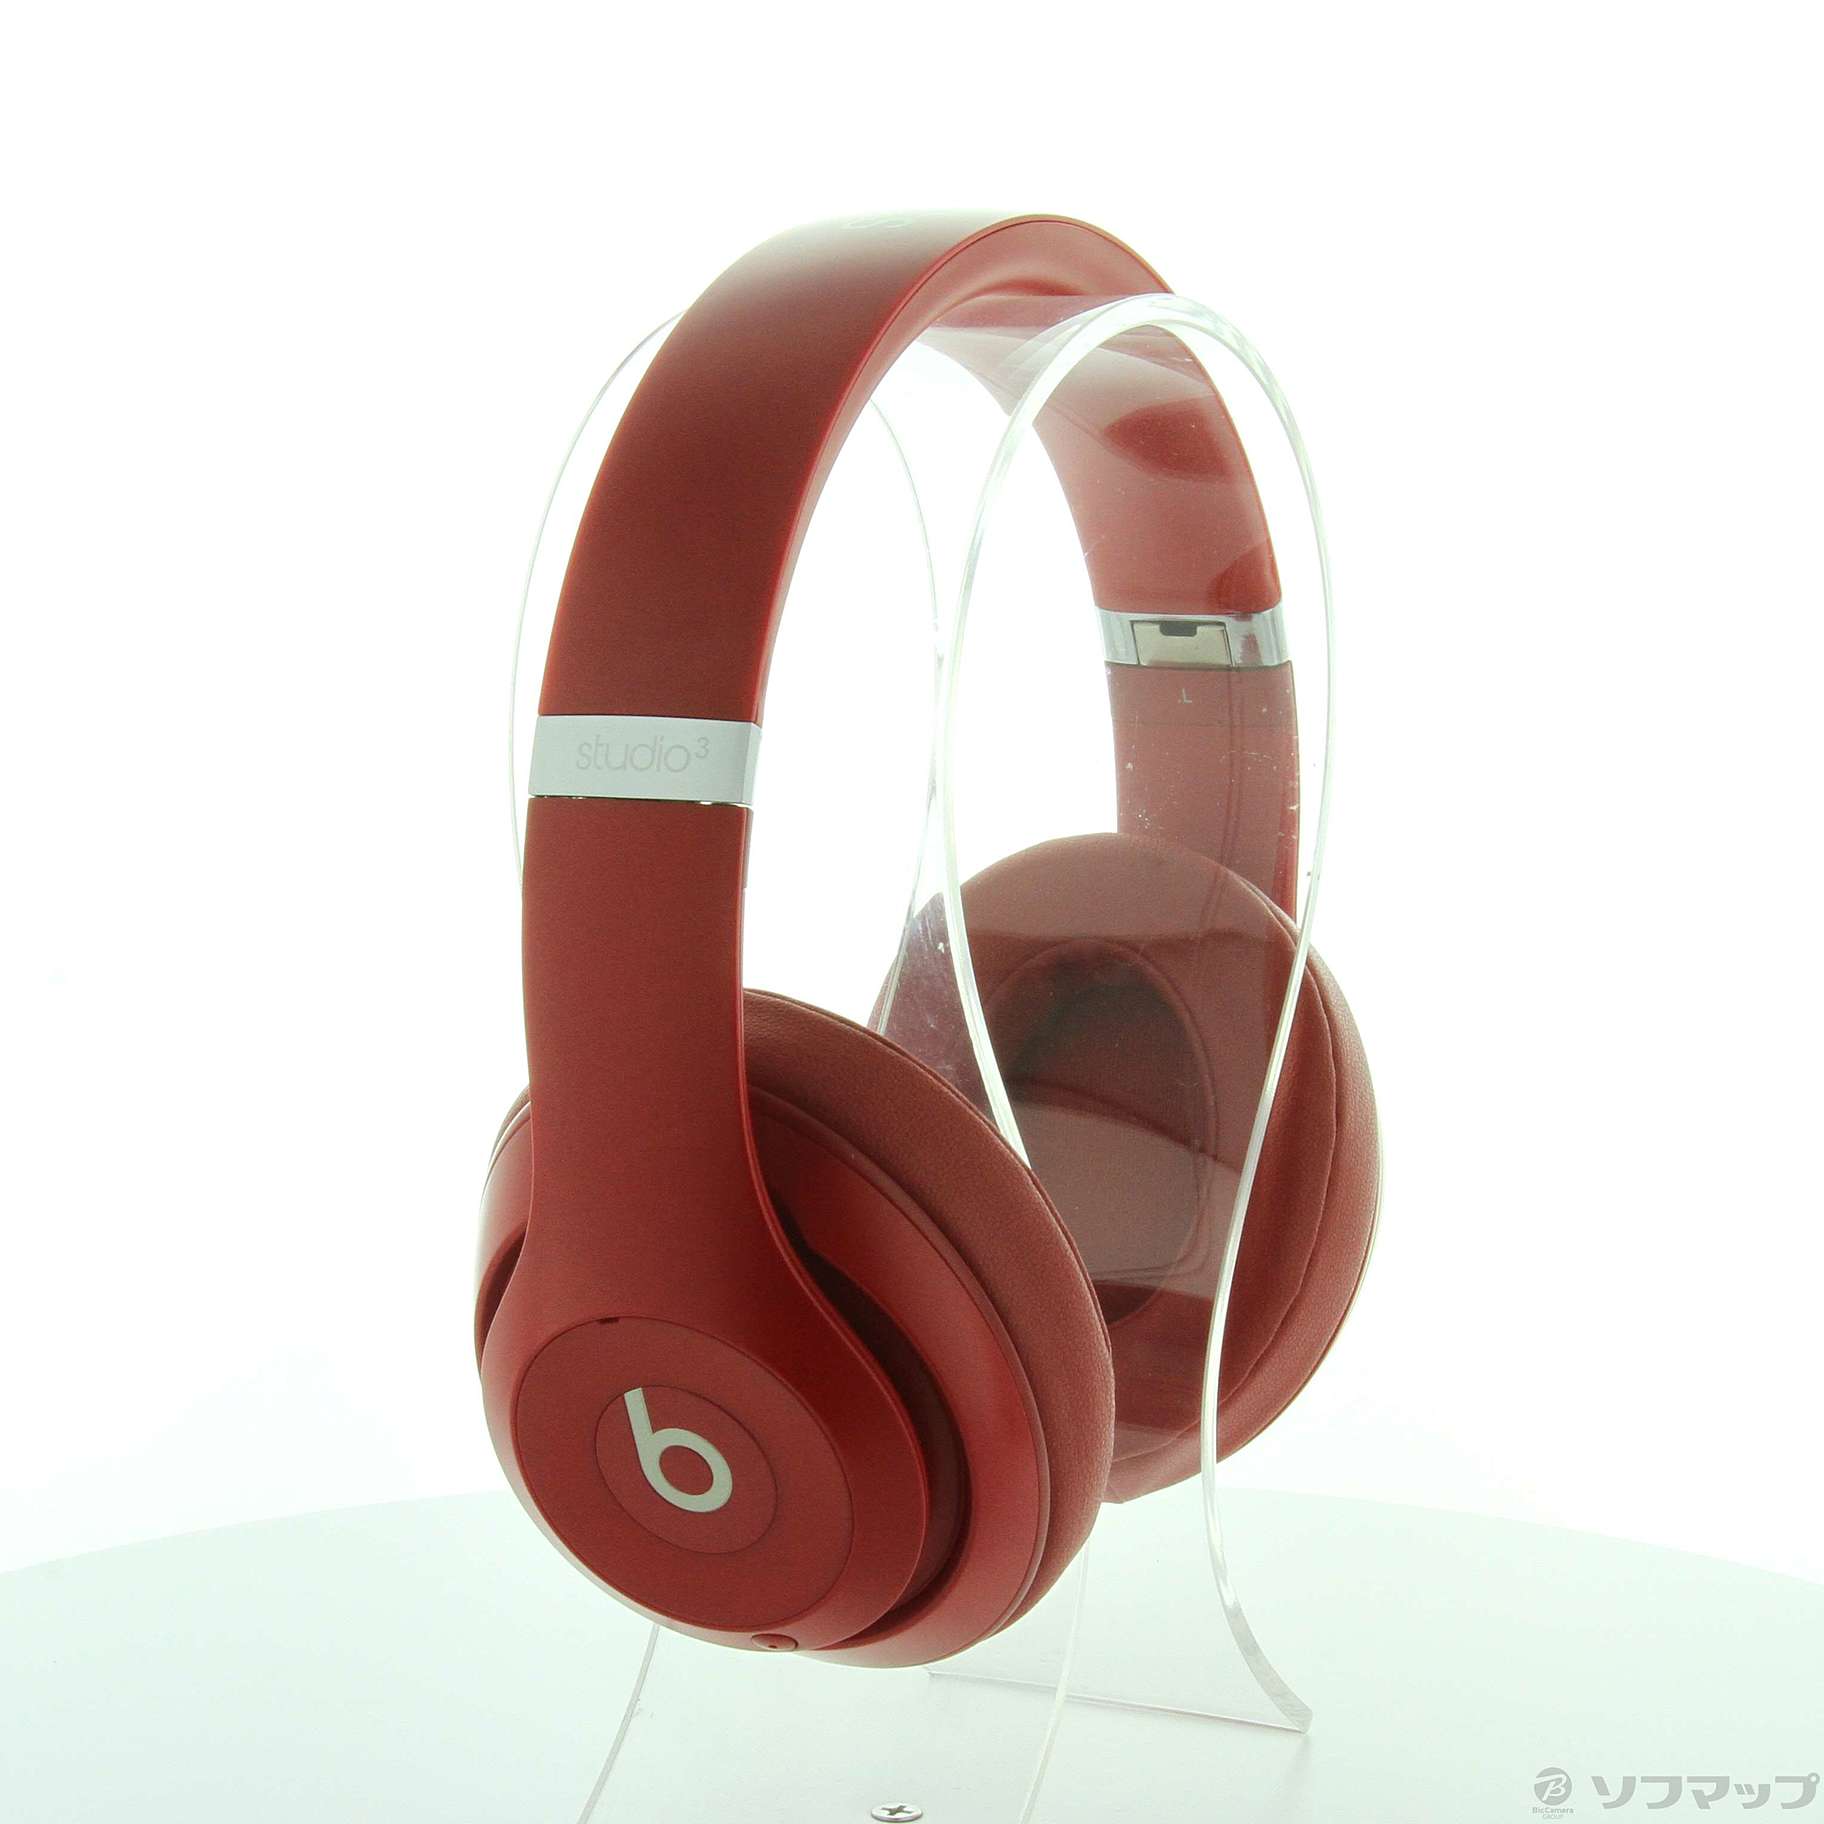 Beats by Dre Wireless ビーツ ワイヤレス 赤 レッド